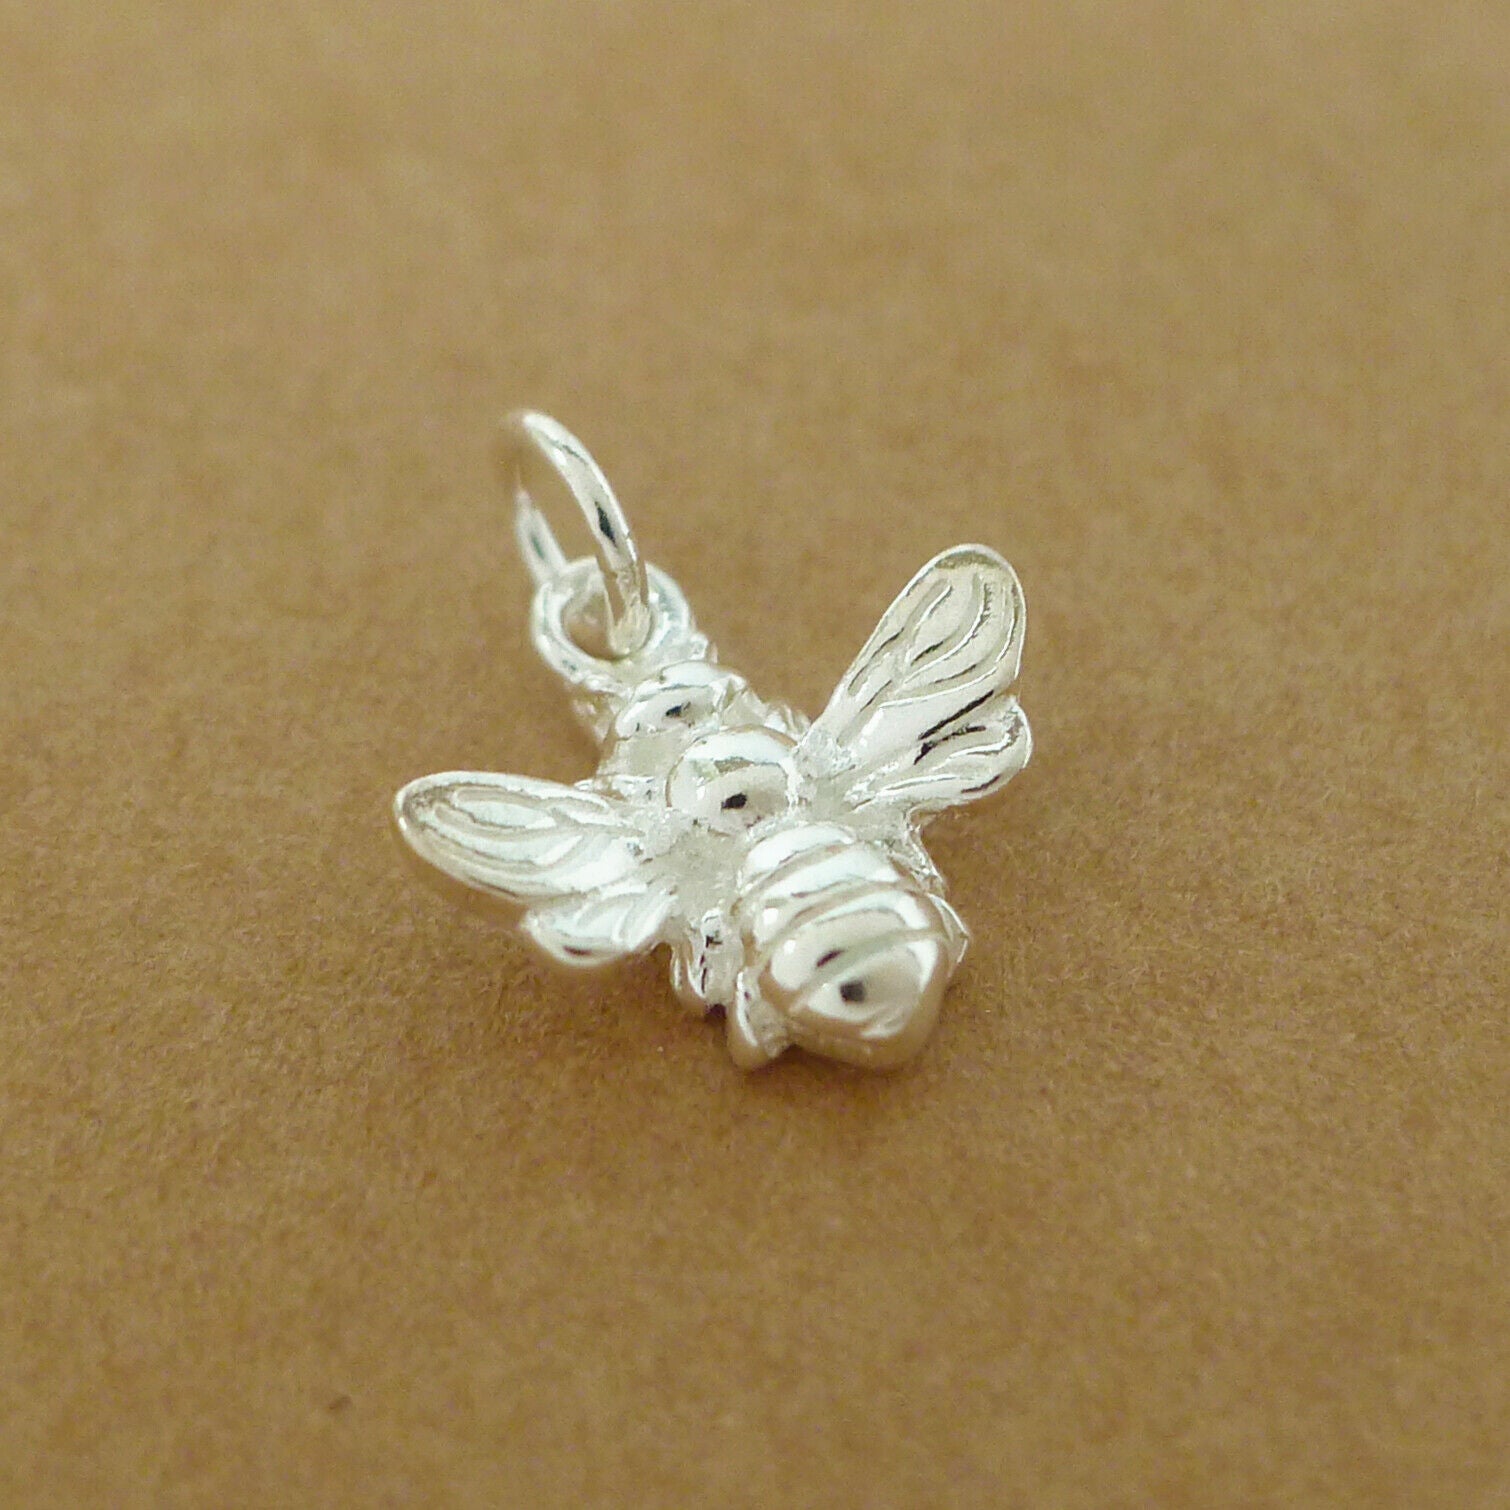 Sterling Silver 3D Bumble Bee Insect Bracelet Necklace Charm Pendant B - sugarkittenlondon